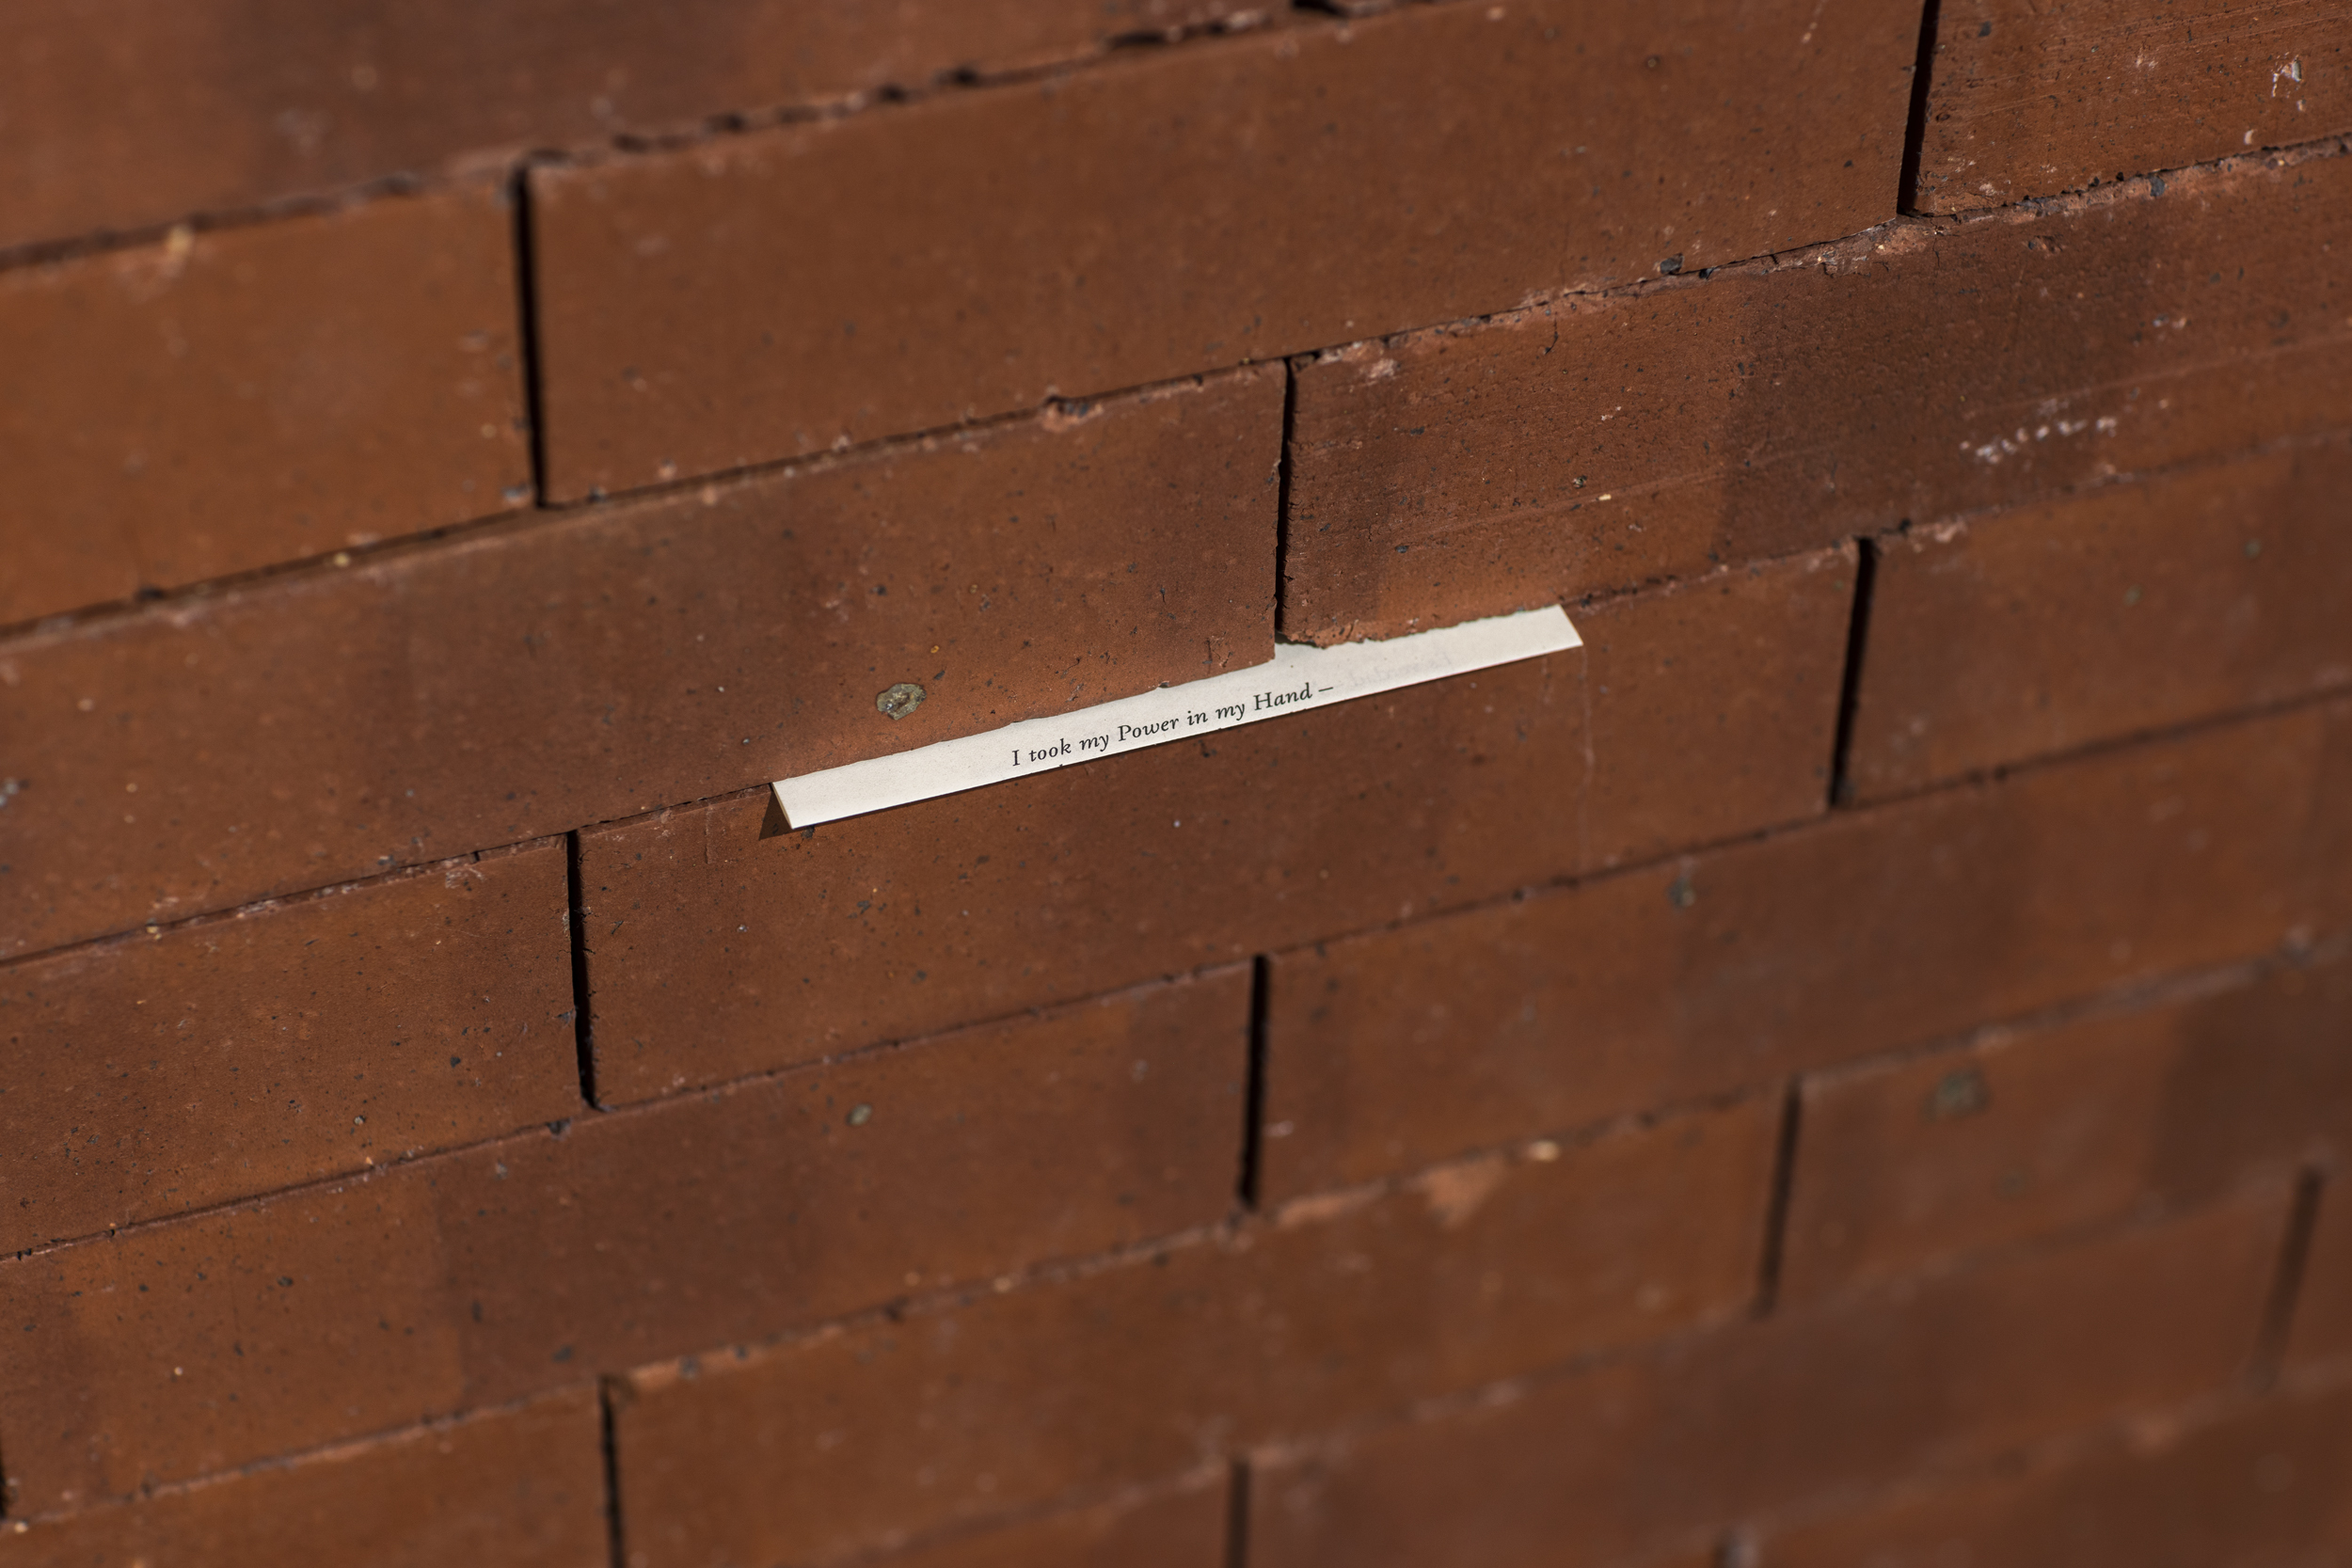 A small slip of paper is sticking out between red bricks. We can see the words "I took my Power in my Hands" typed in small font on the paper.